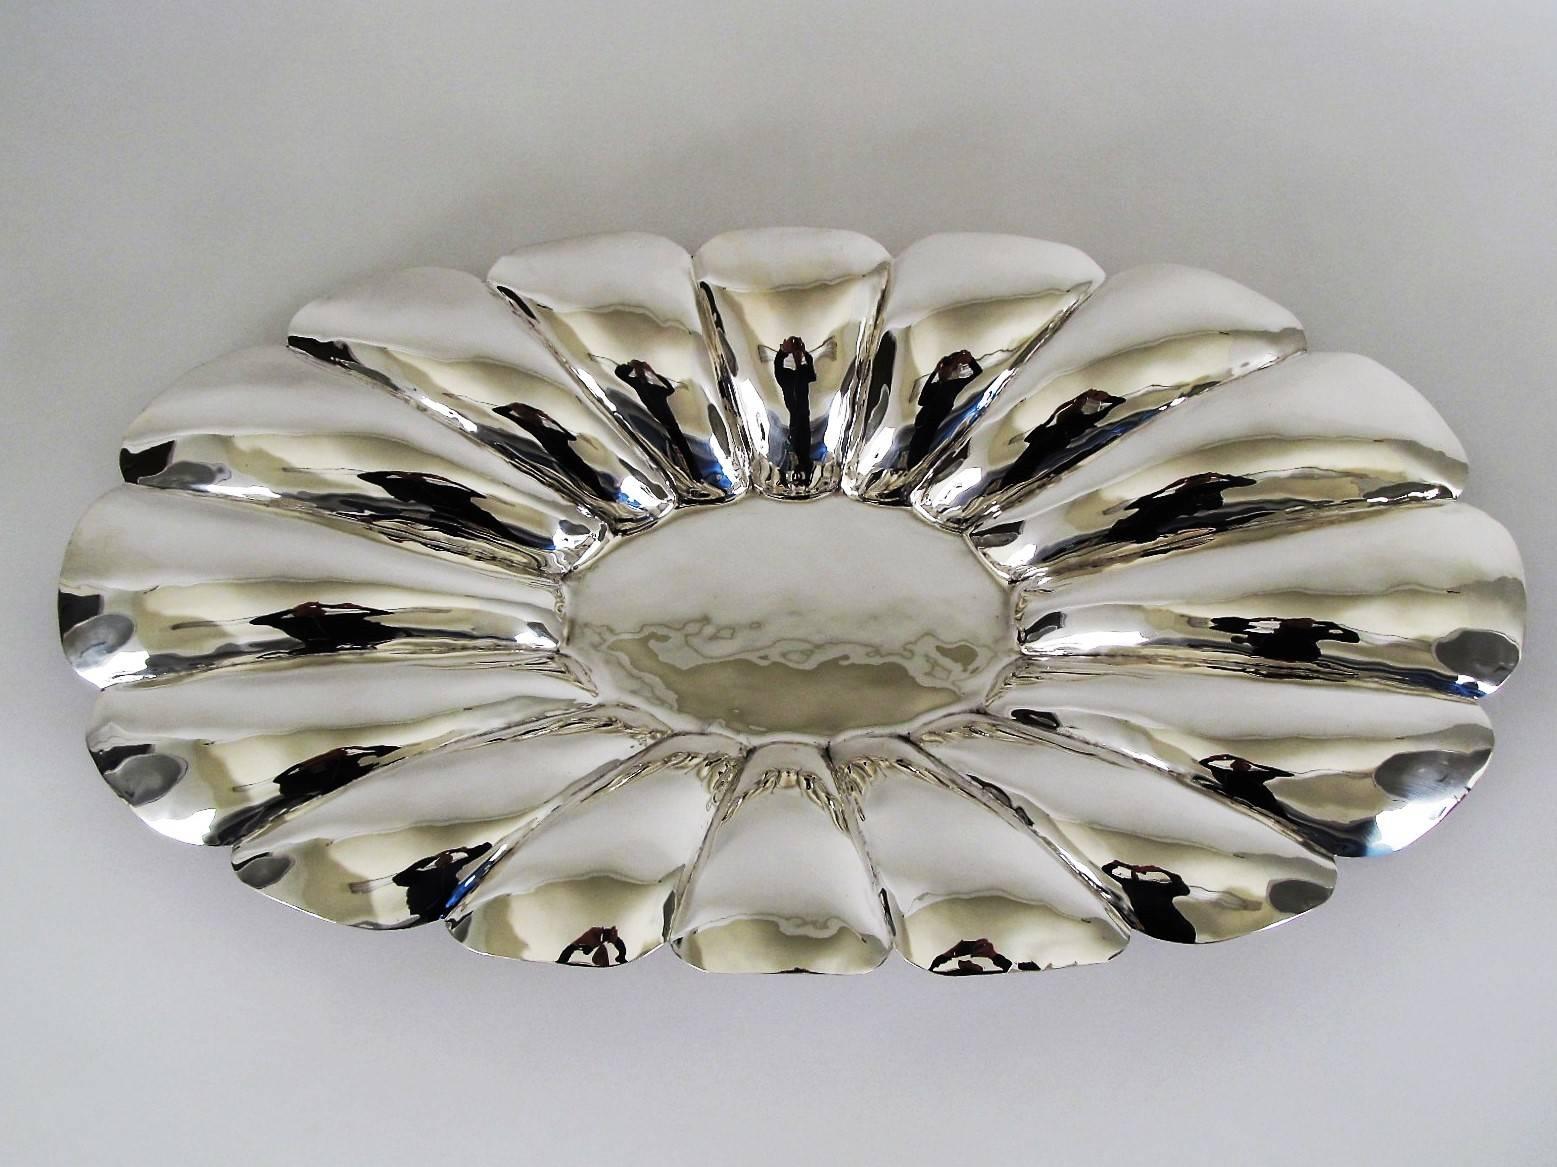 This is a very impressive sterling silver bowl that measures 25 inches across and weighs 1020 grams. Made by Mexican silversmith L. Maciel, circa 1930s-1940s. The entire piece is hand-hammered into a beautifully lobed bowl.